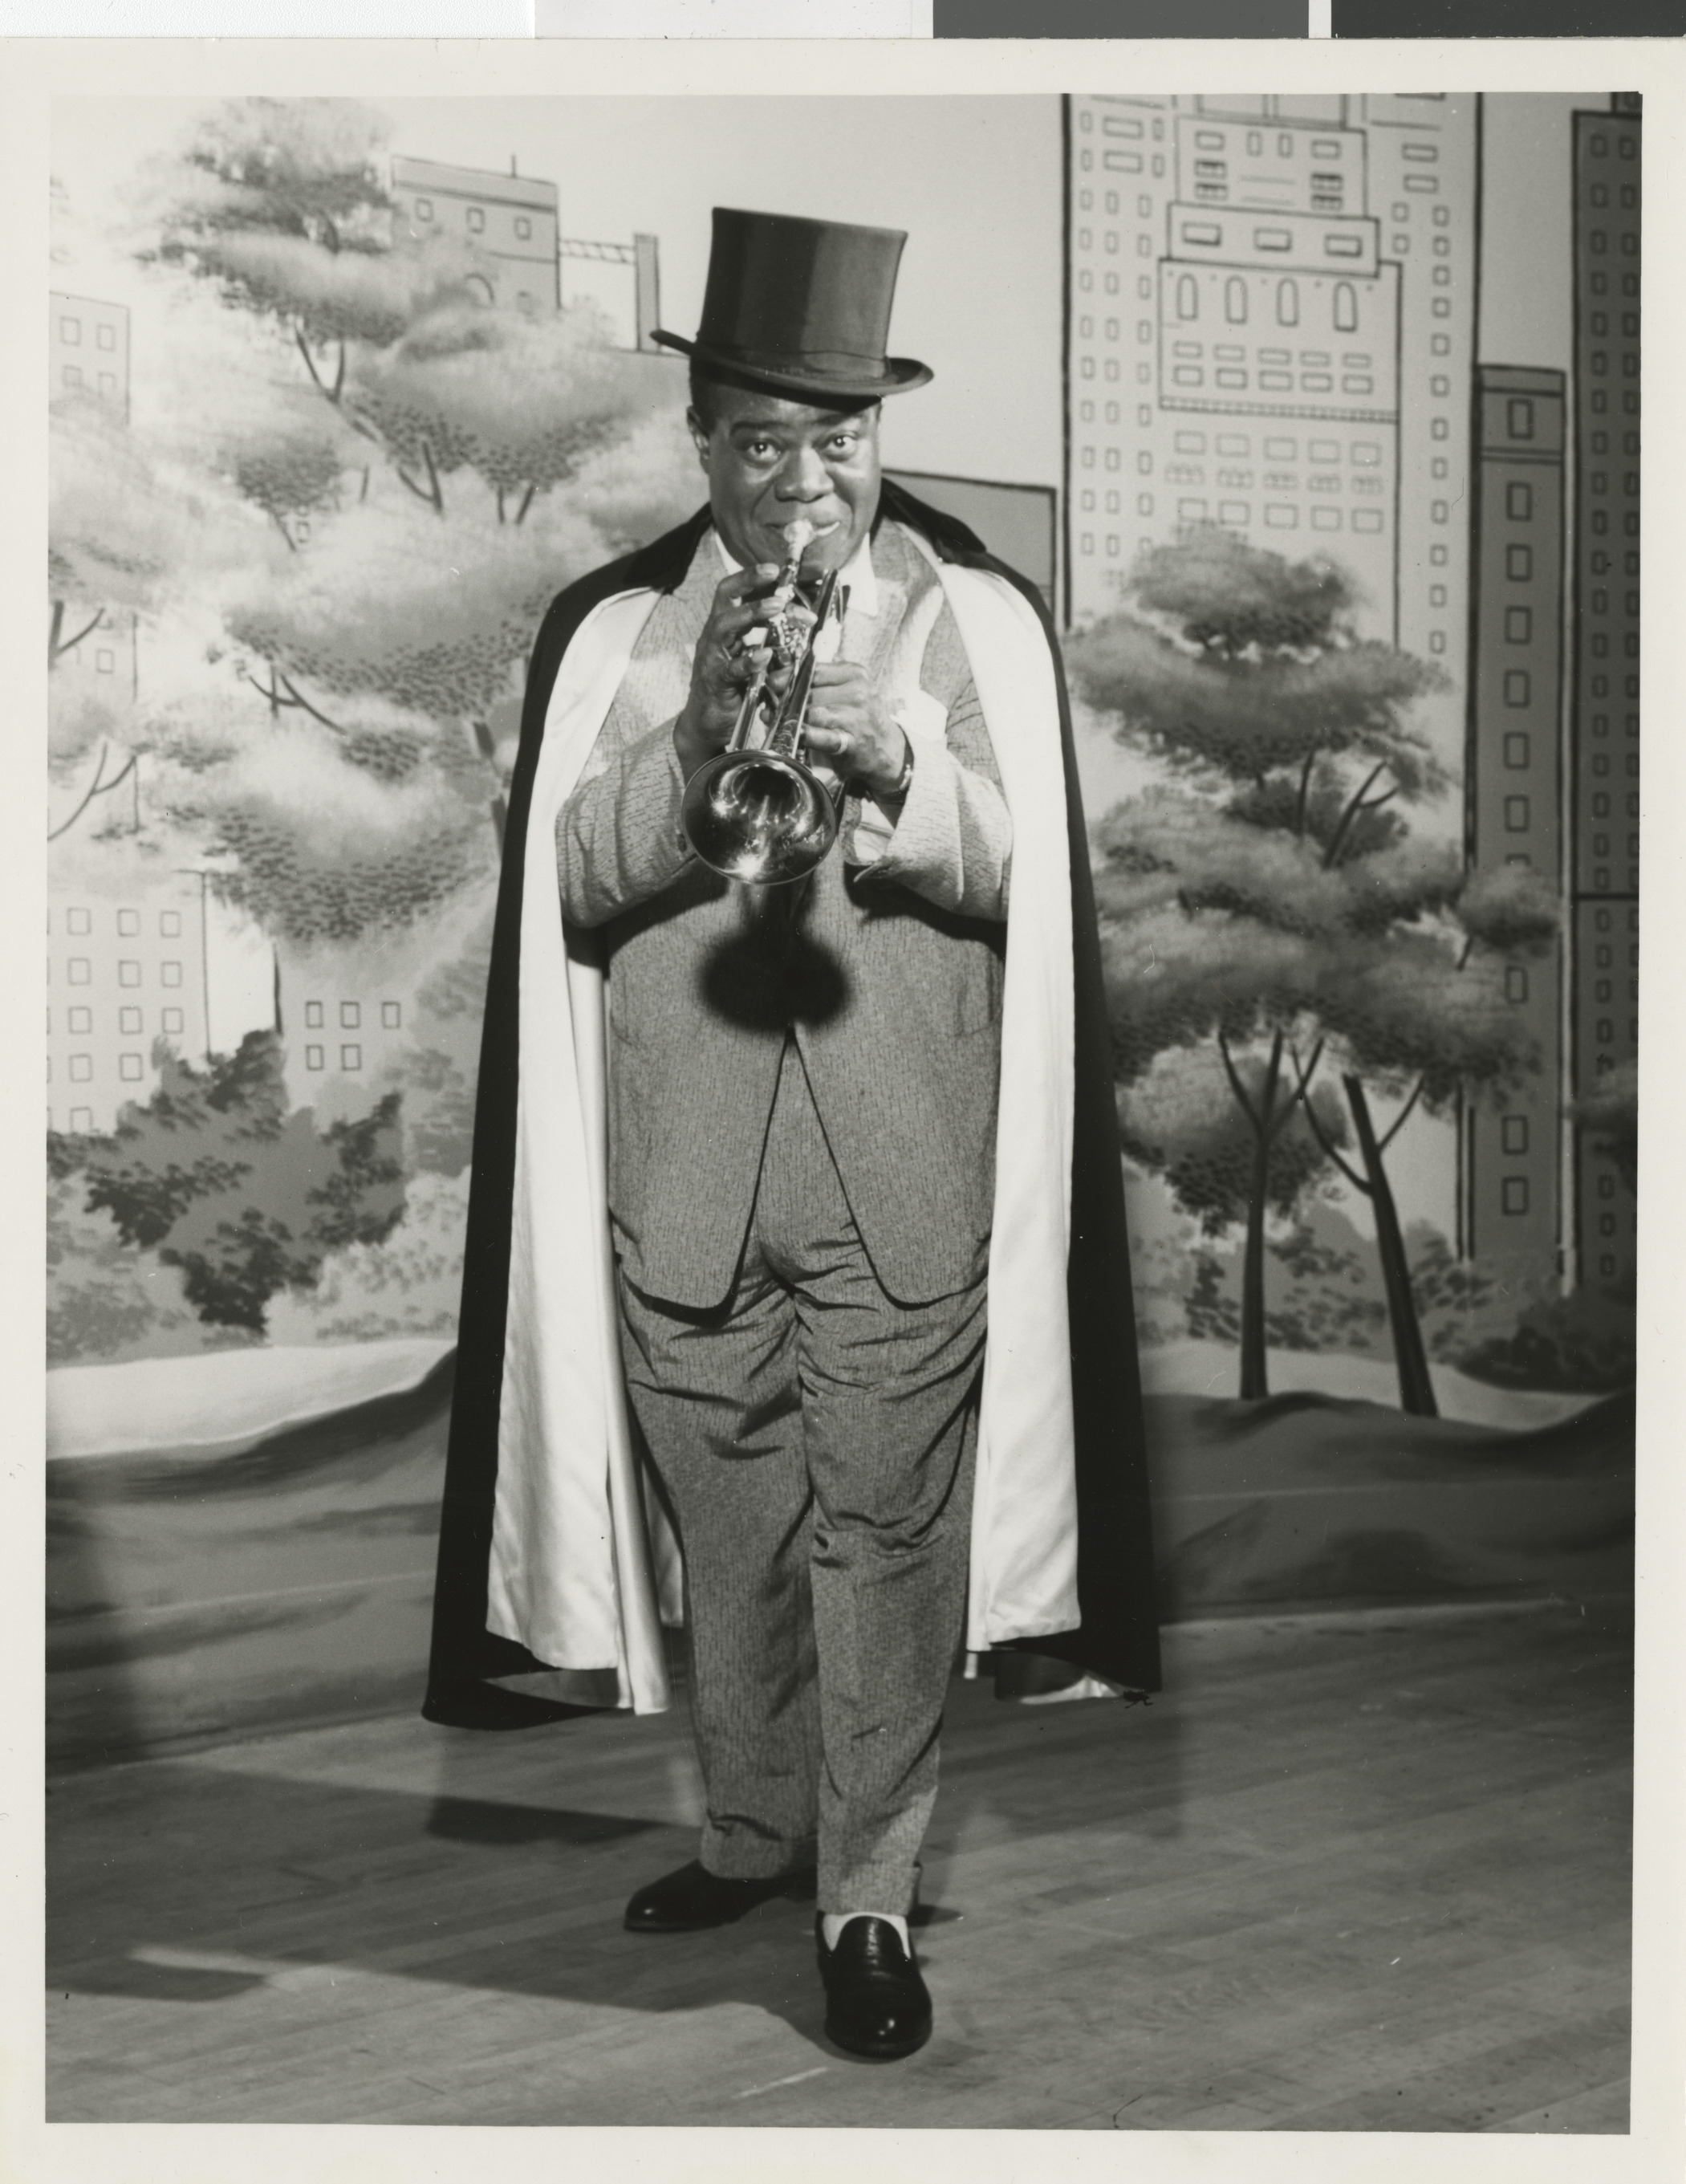 Publicity and performance photographs of Louis Armstrong, 1953-1968